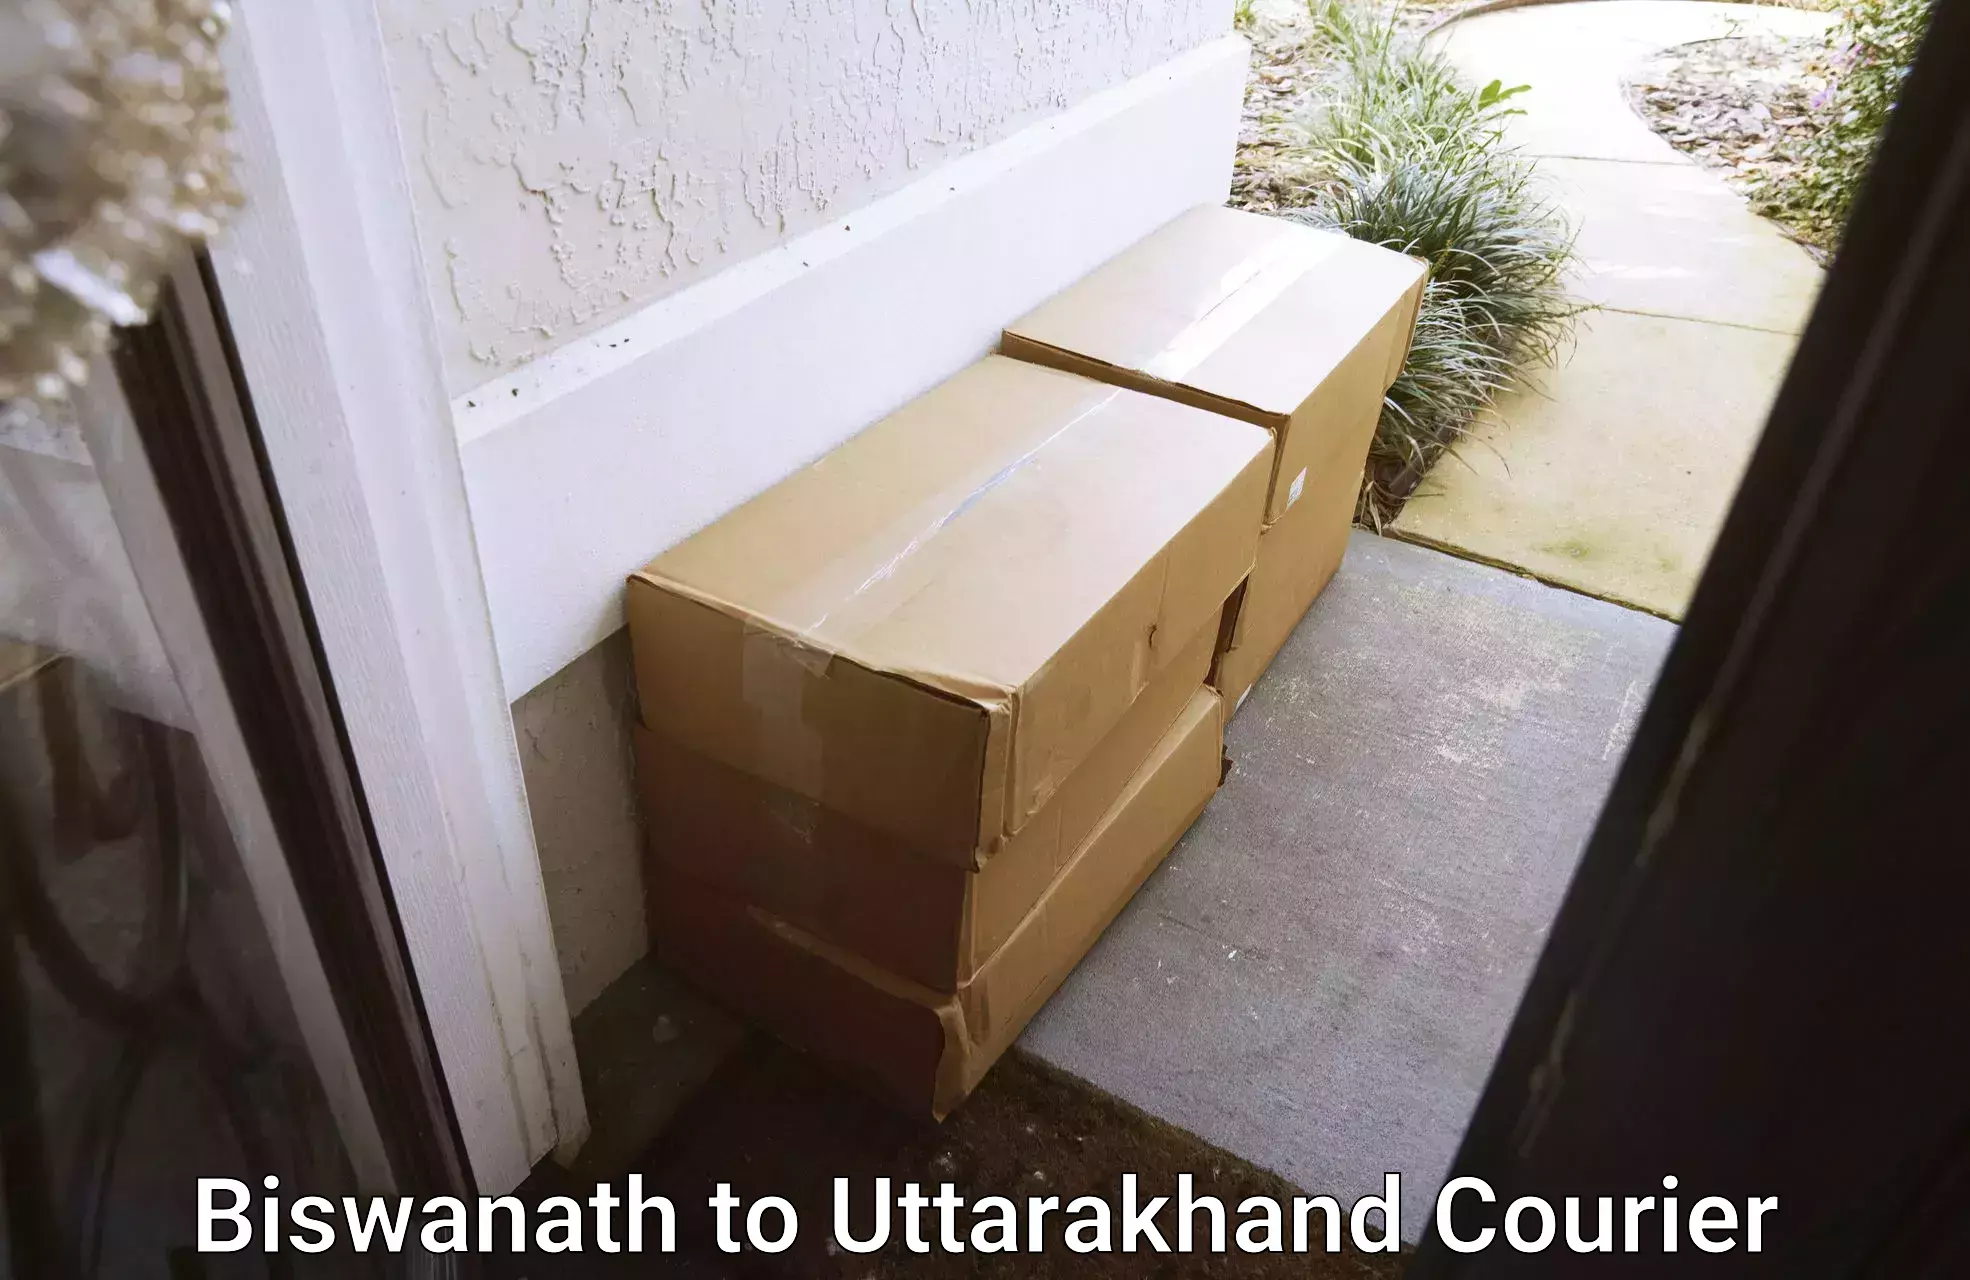 Personal parcel delivery in Biswanath to Tanakpur